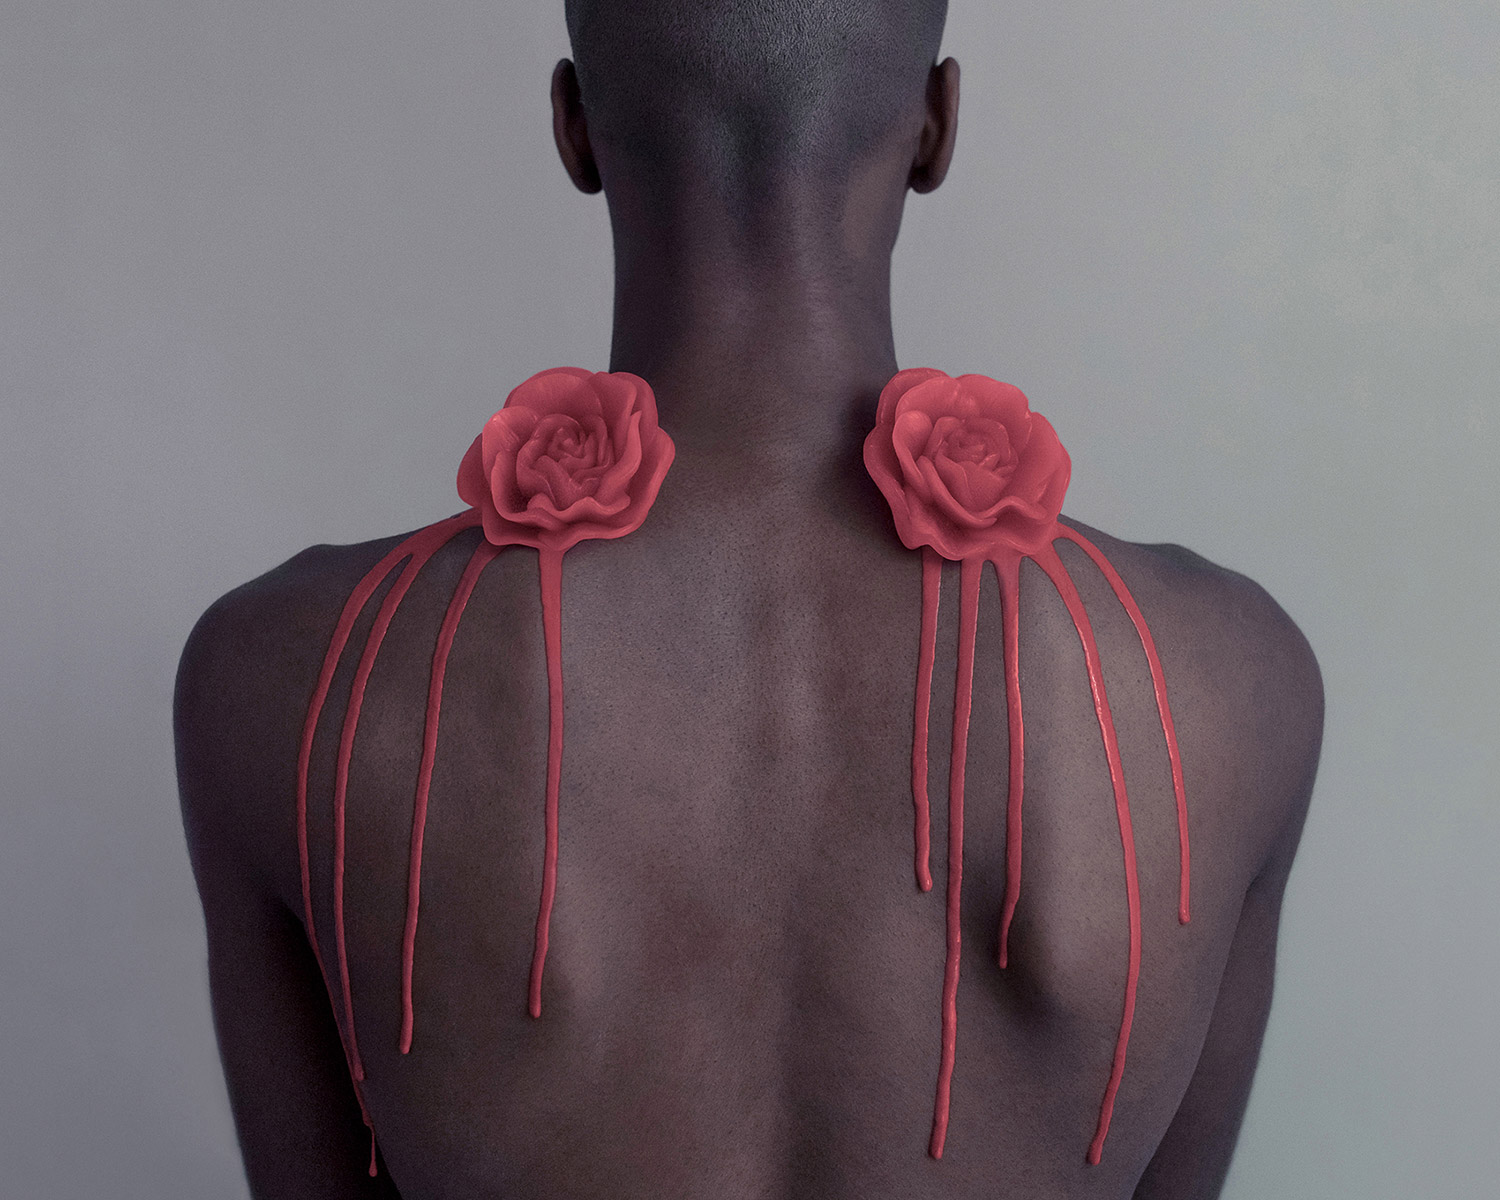 Brooke DiDonato, Roses - red roses on shoulders 